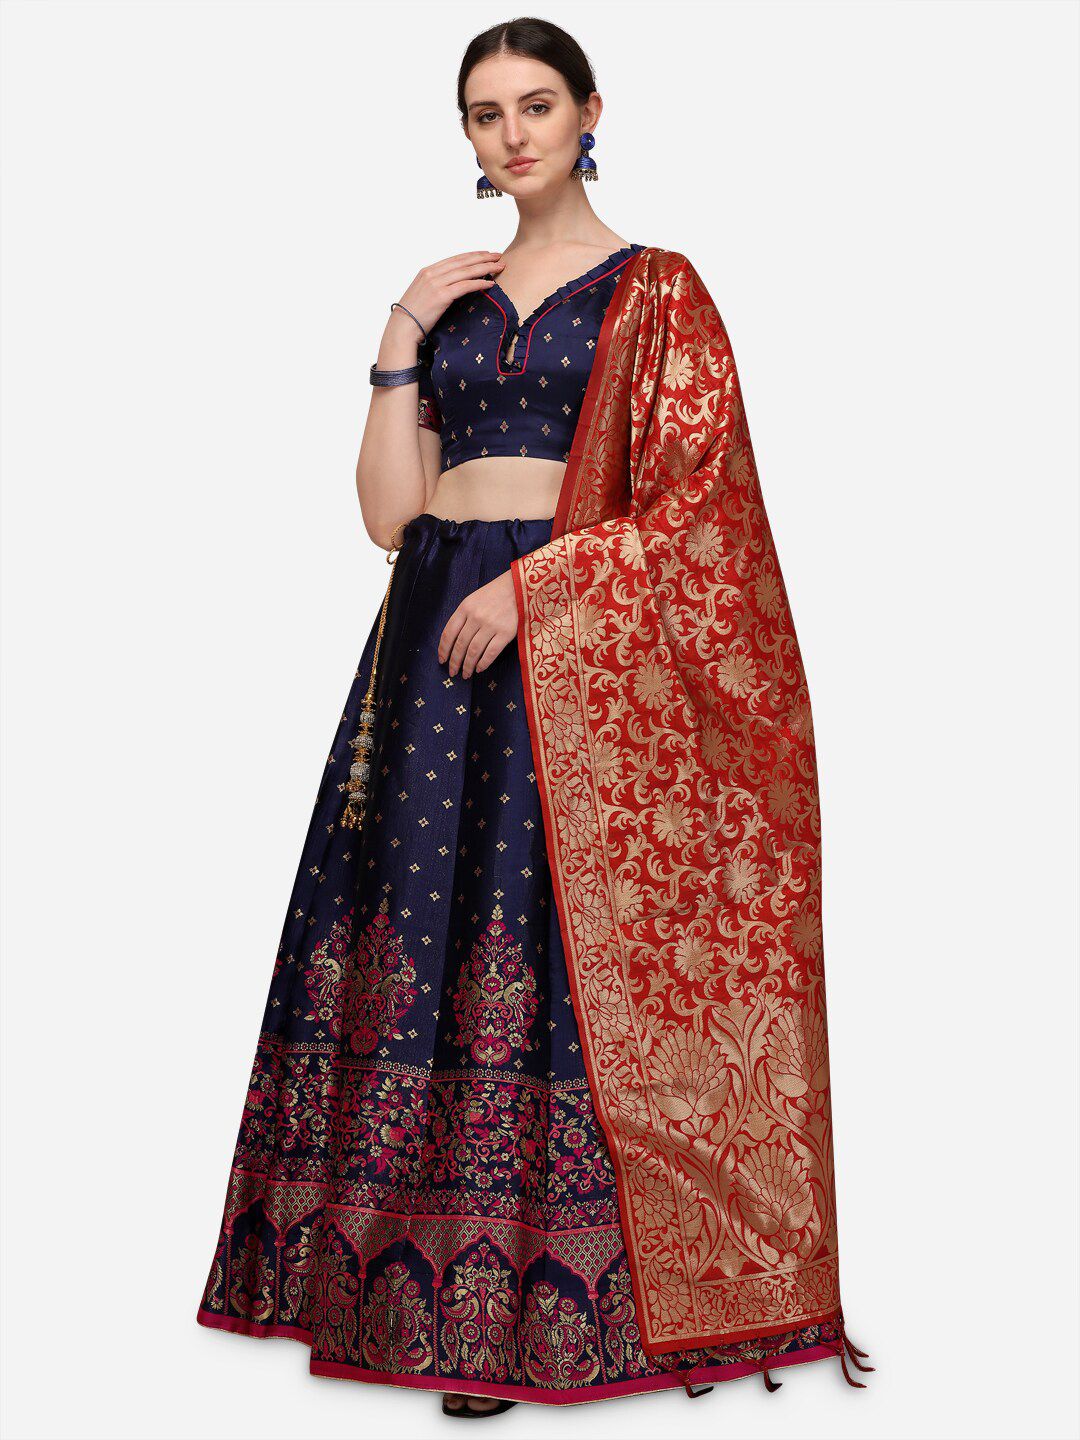 Mameraa Blue & Red Woven Design Semi-Stitched Lehenga & Unstitched Blouse With Dupatta Price in India